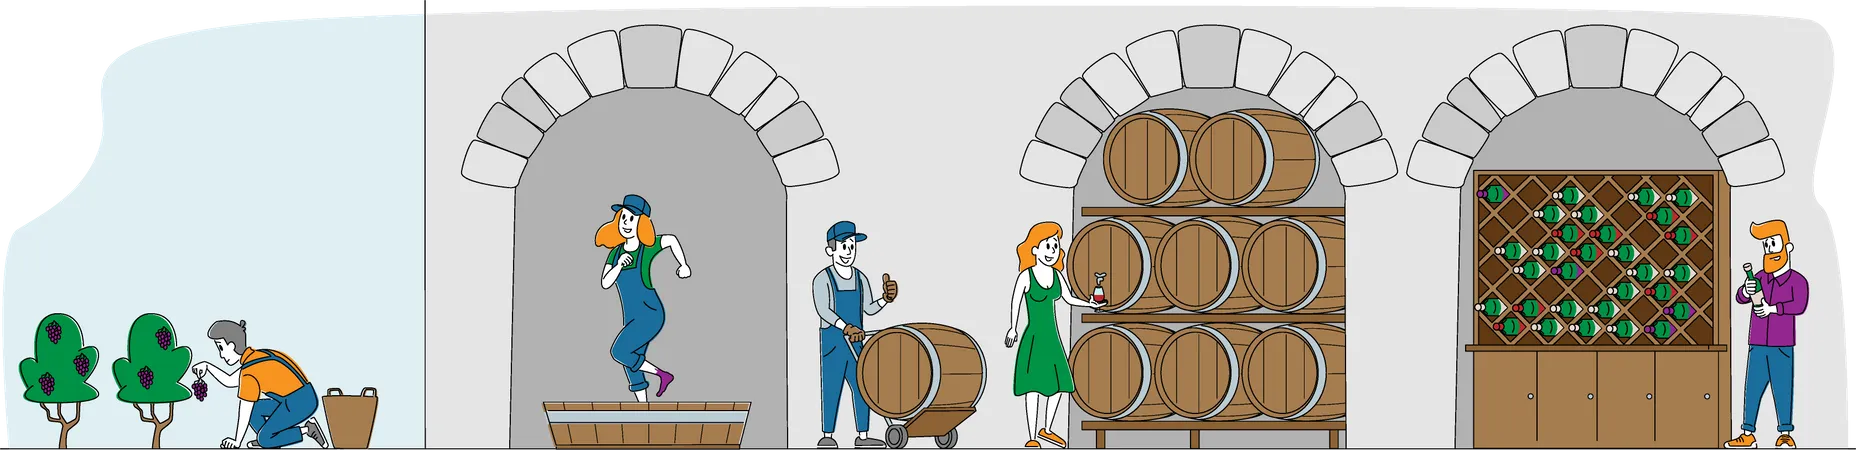 Wine Producing and Wine Drinking Illustration